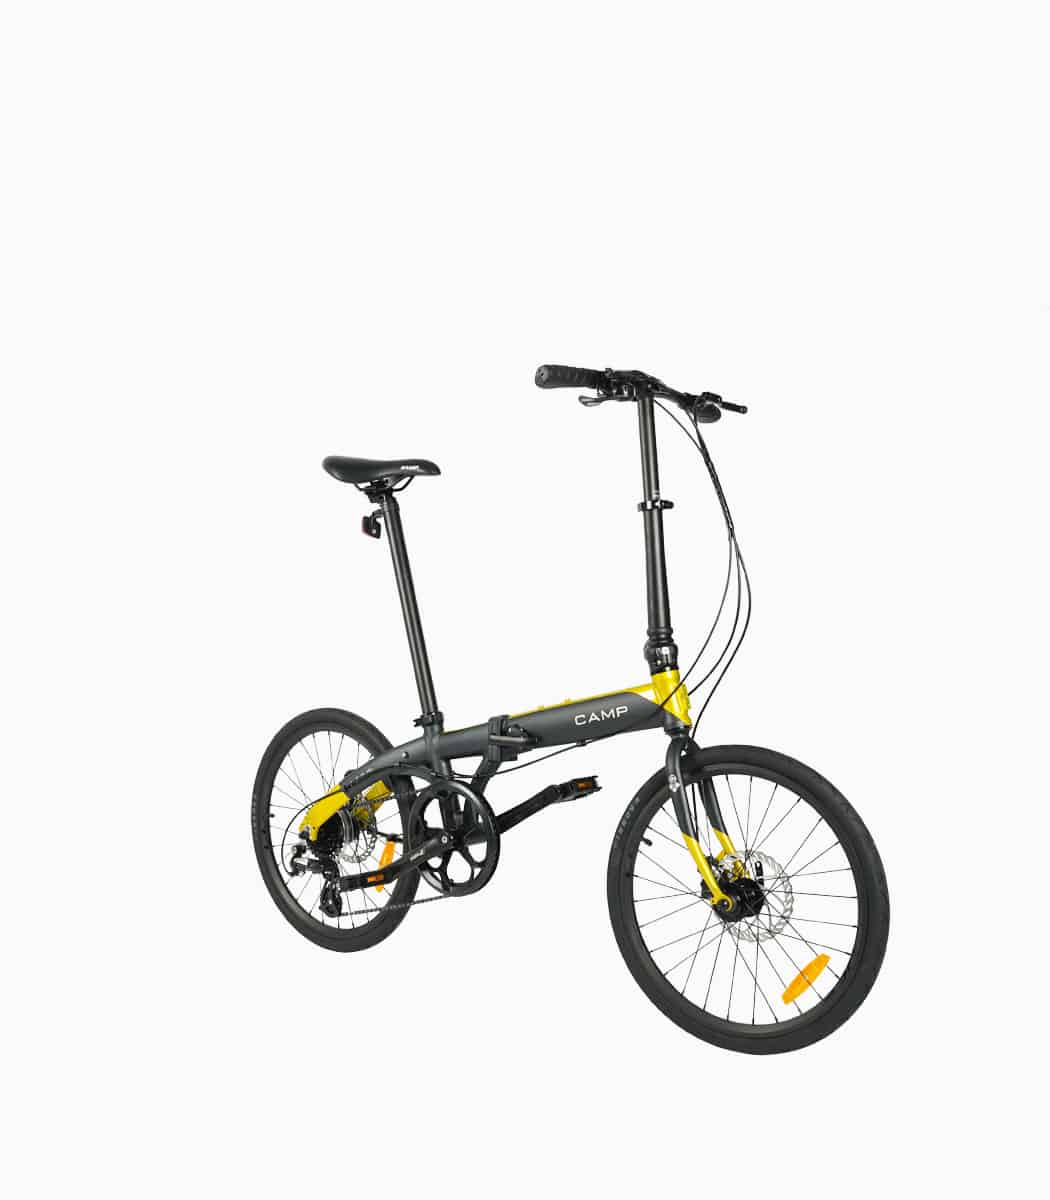 CAMP Polo 8 (BLACK) foldable bicycle angled right